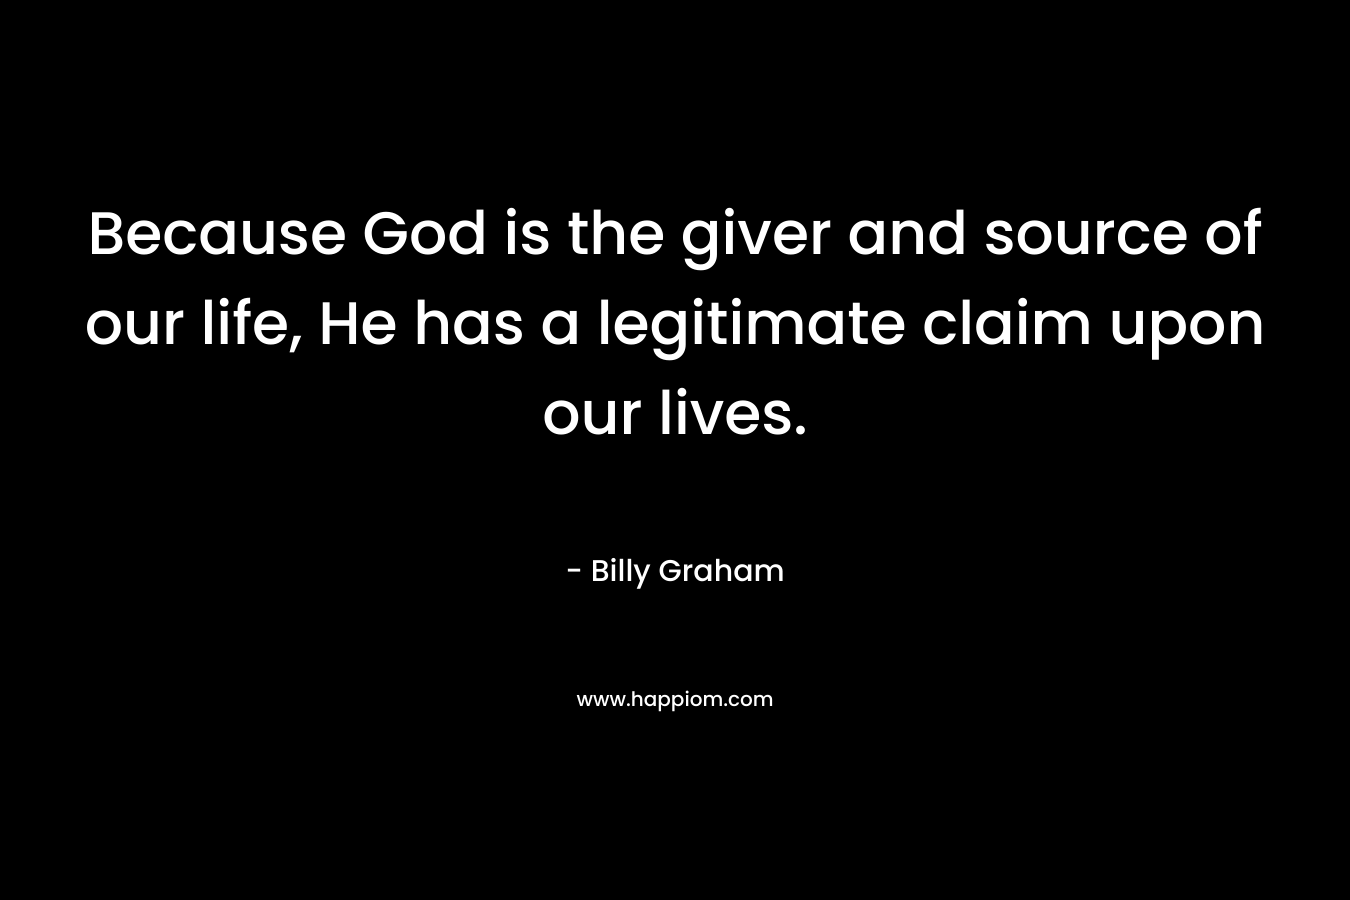 Because God is the giver and source of our life, He has a legitimate claim upon our lives.